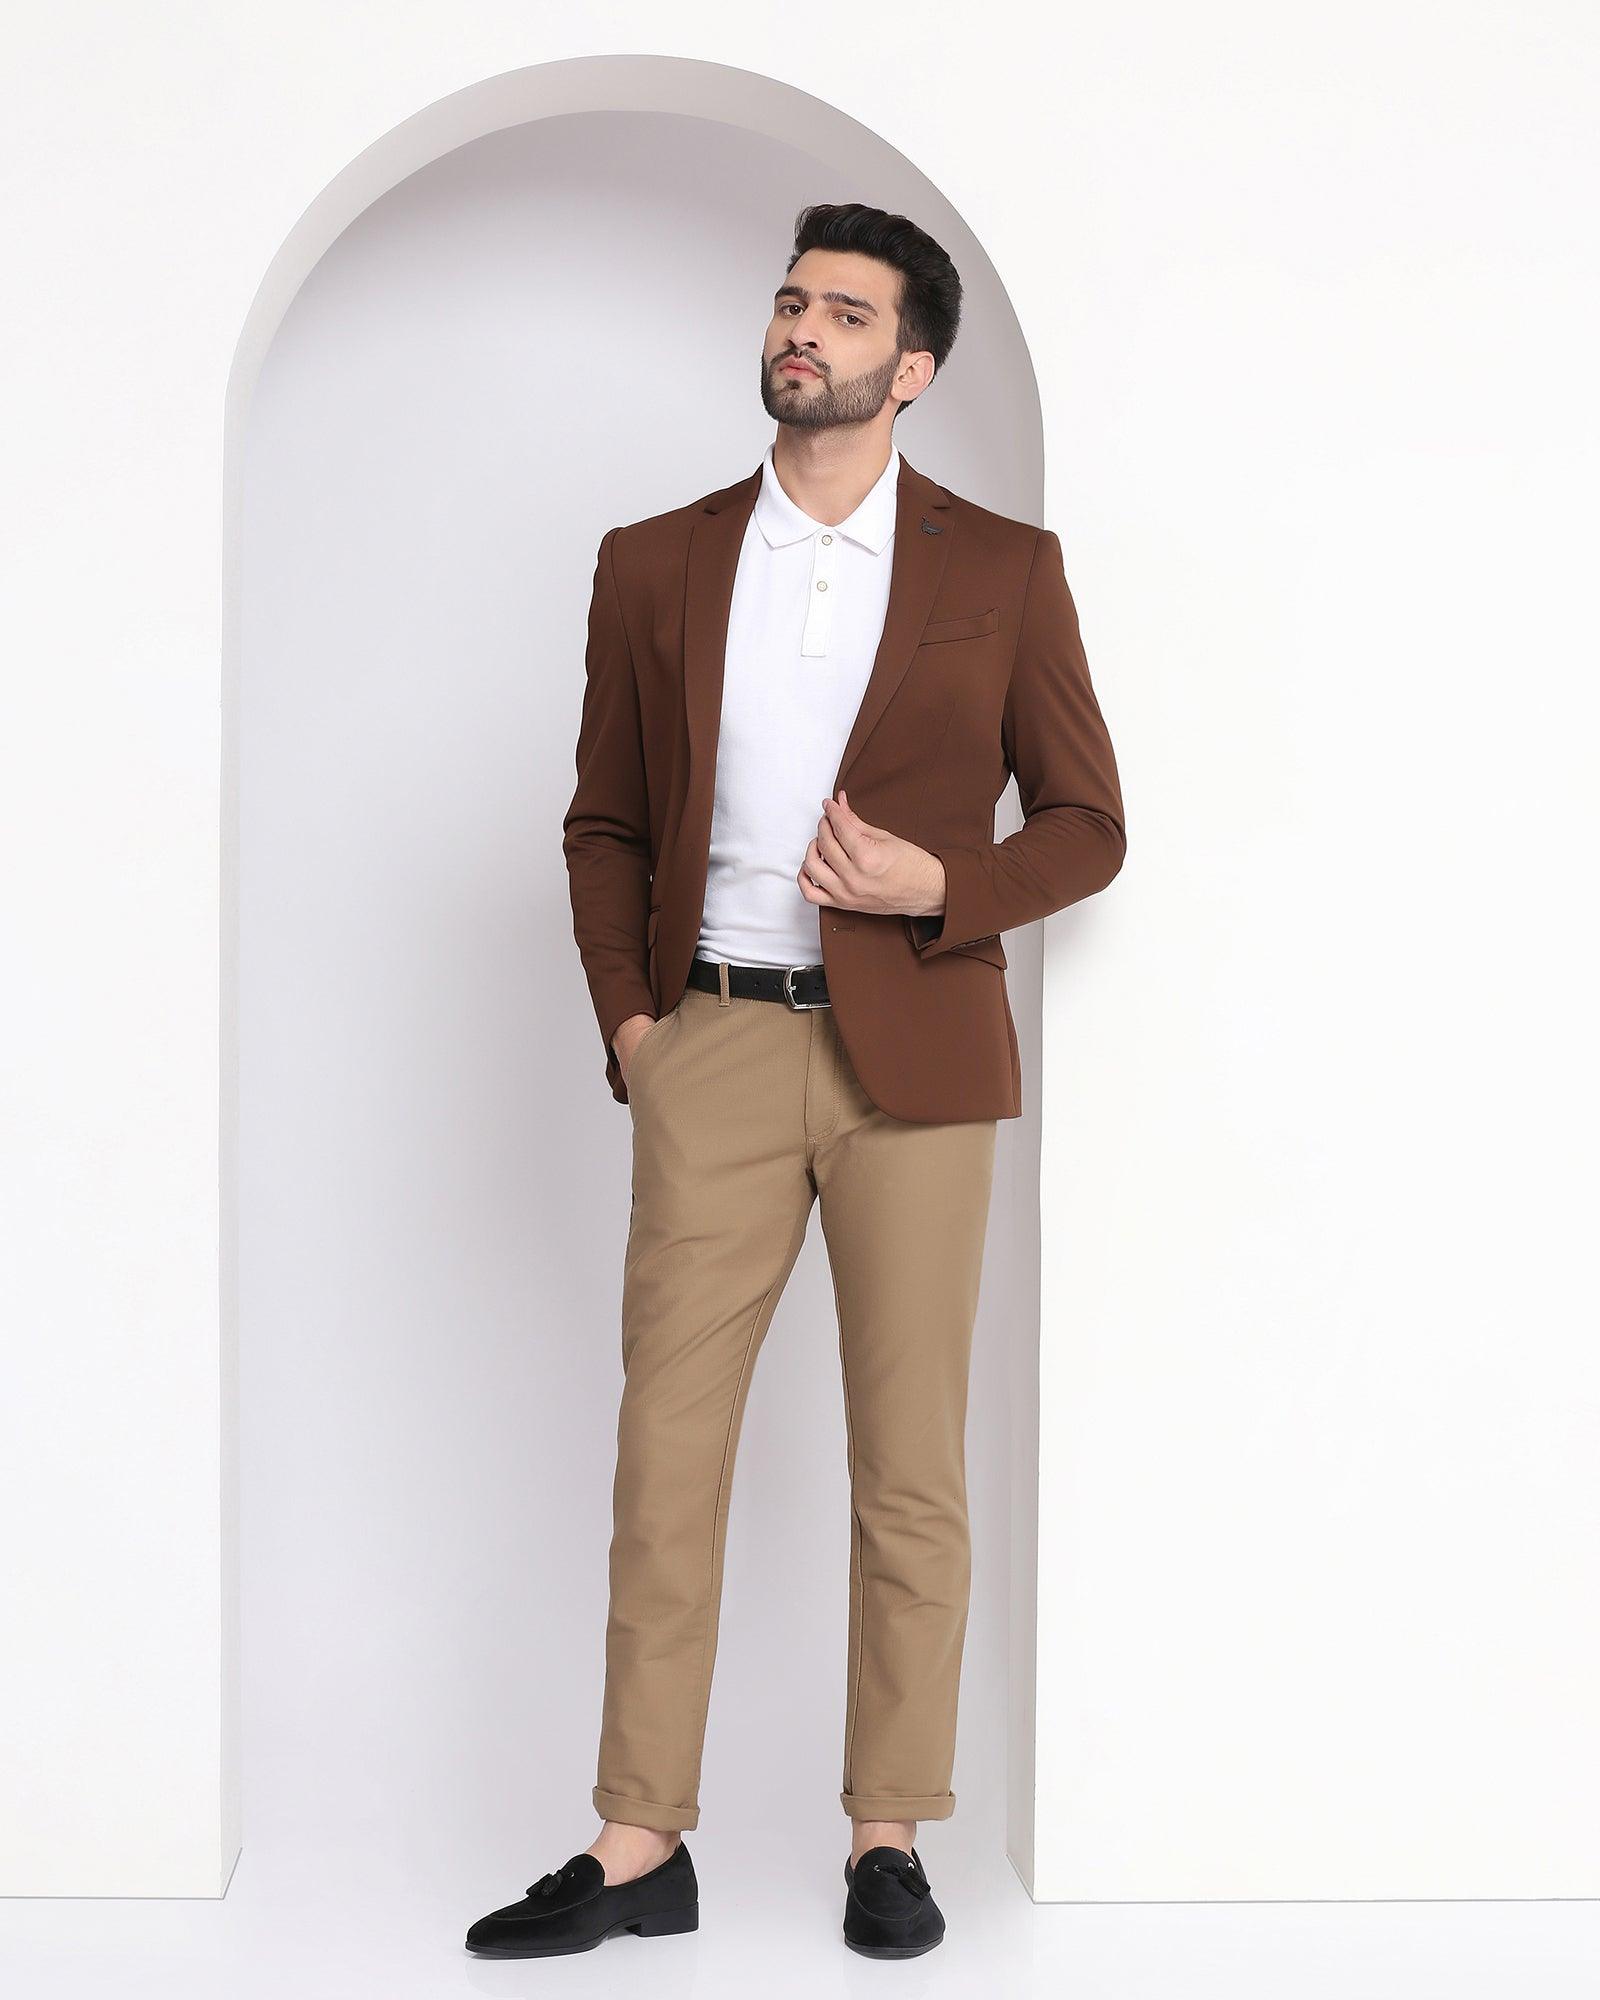 Brown Blazer Matching Shirt and Pants || Brown Blazer Combination -  TiptopGents | Mens business casual outfits, Mens fashion blazer, Sports coat  and jeans